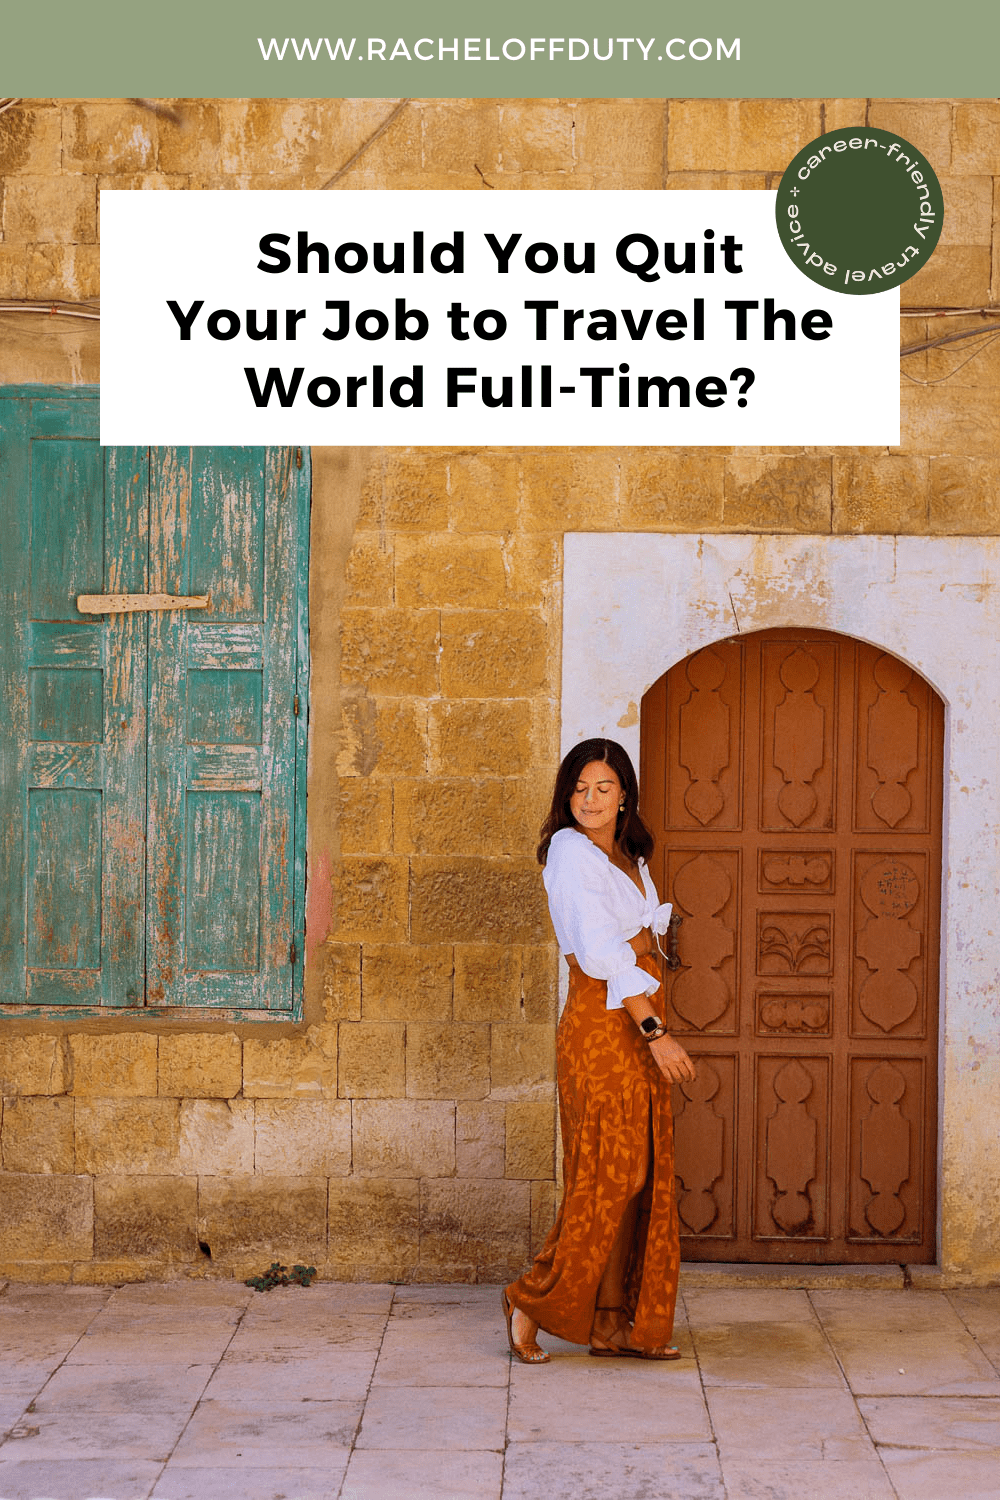 Should you quit your job to travel the world full-time? - Rachel Off Duty